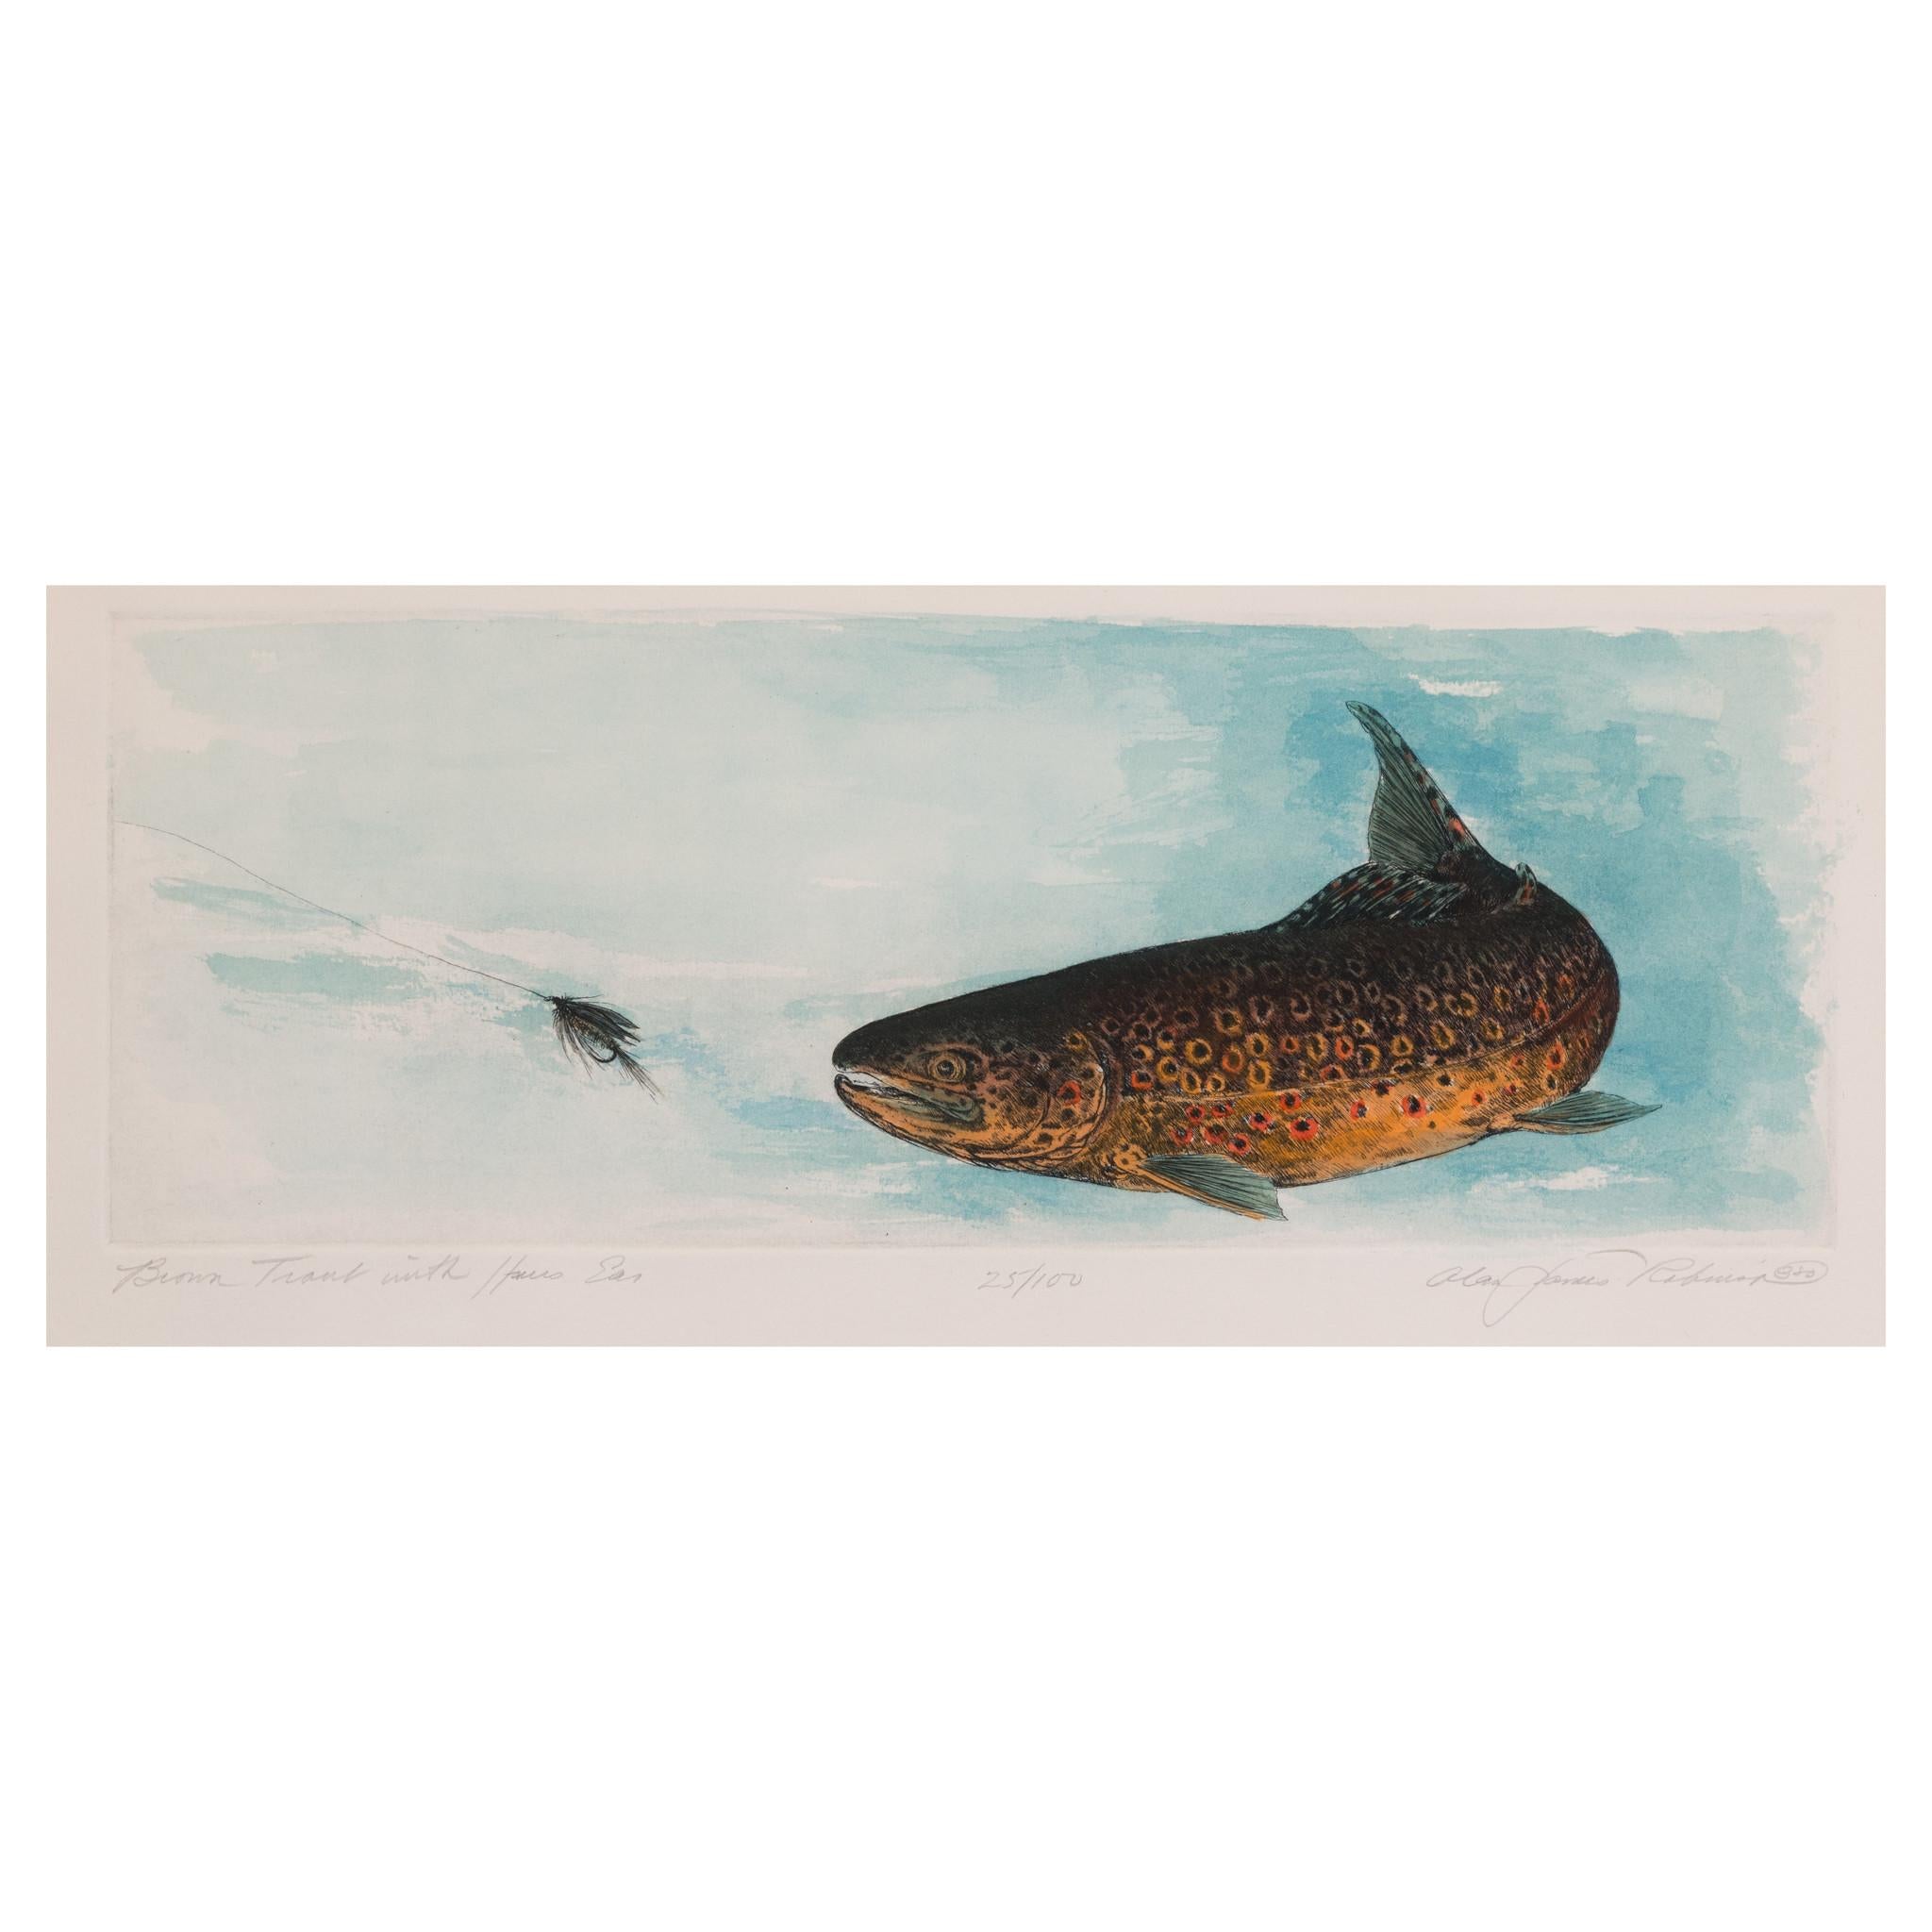 Paint Trout Engraving Watercolors with Flies by Alan James Robinson